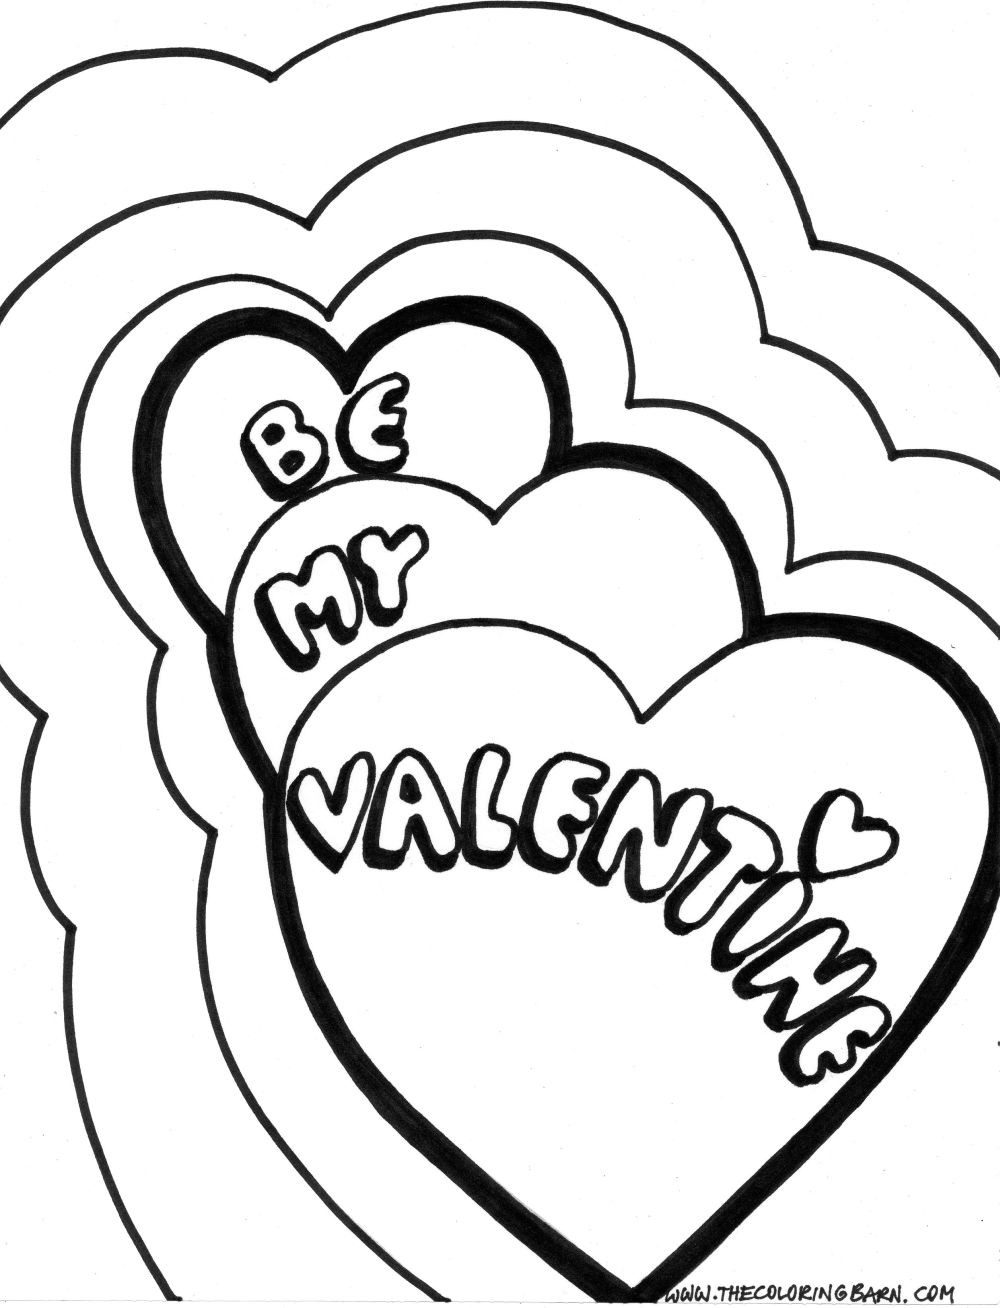 Printable Valentine Day Coloring Pages
 Free Printable Valentine Day Coloring Pages